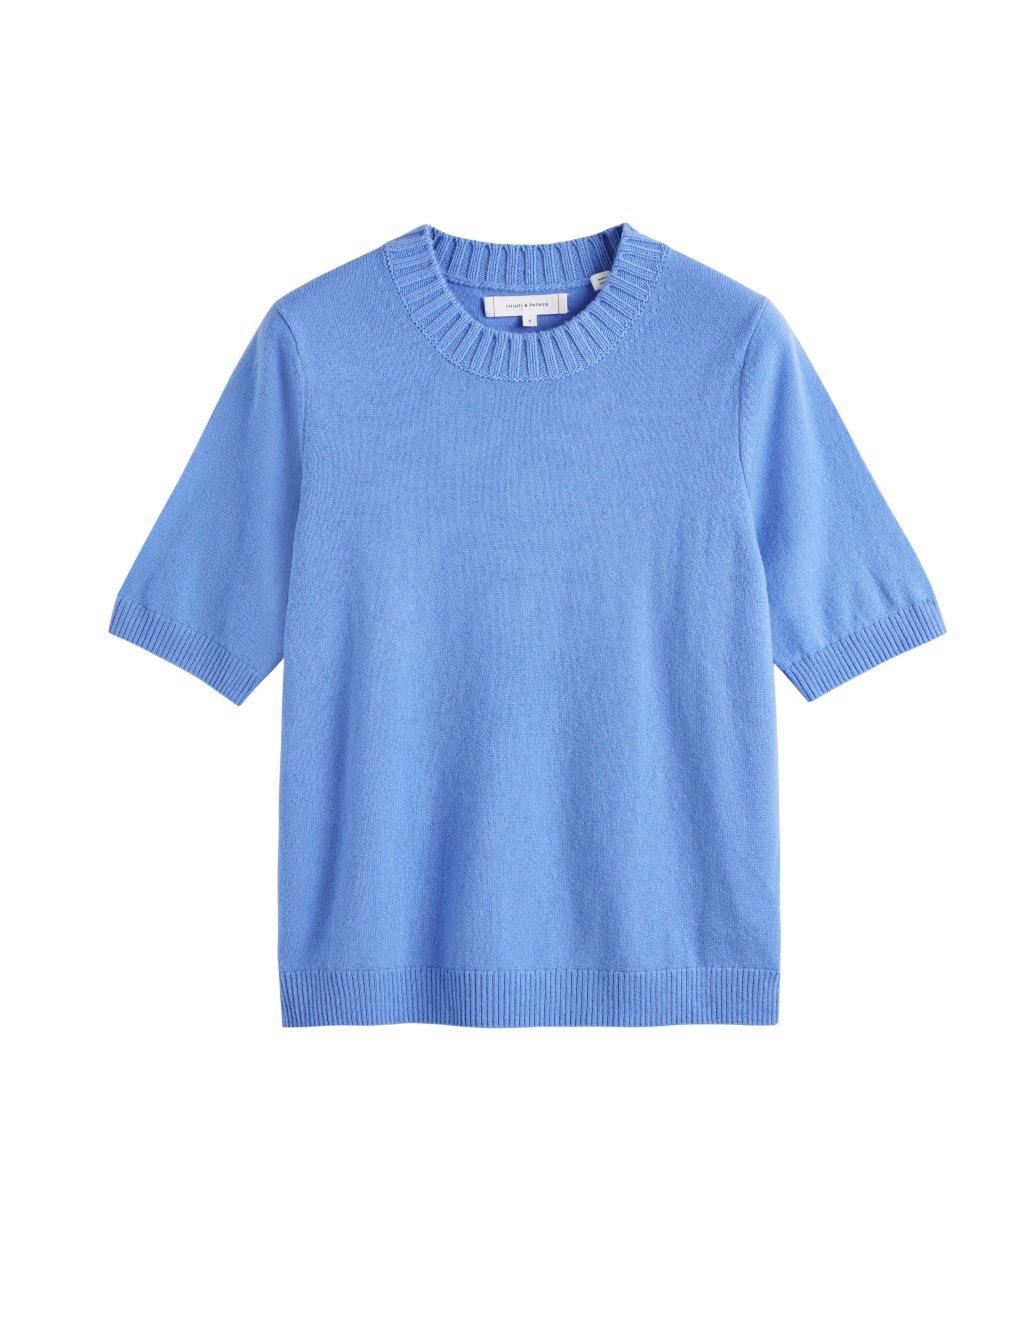 Wool Rich Knitted Top with Cashmere image 2